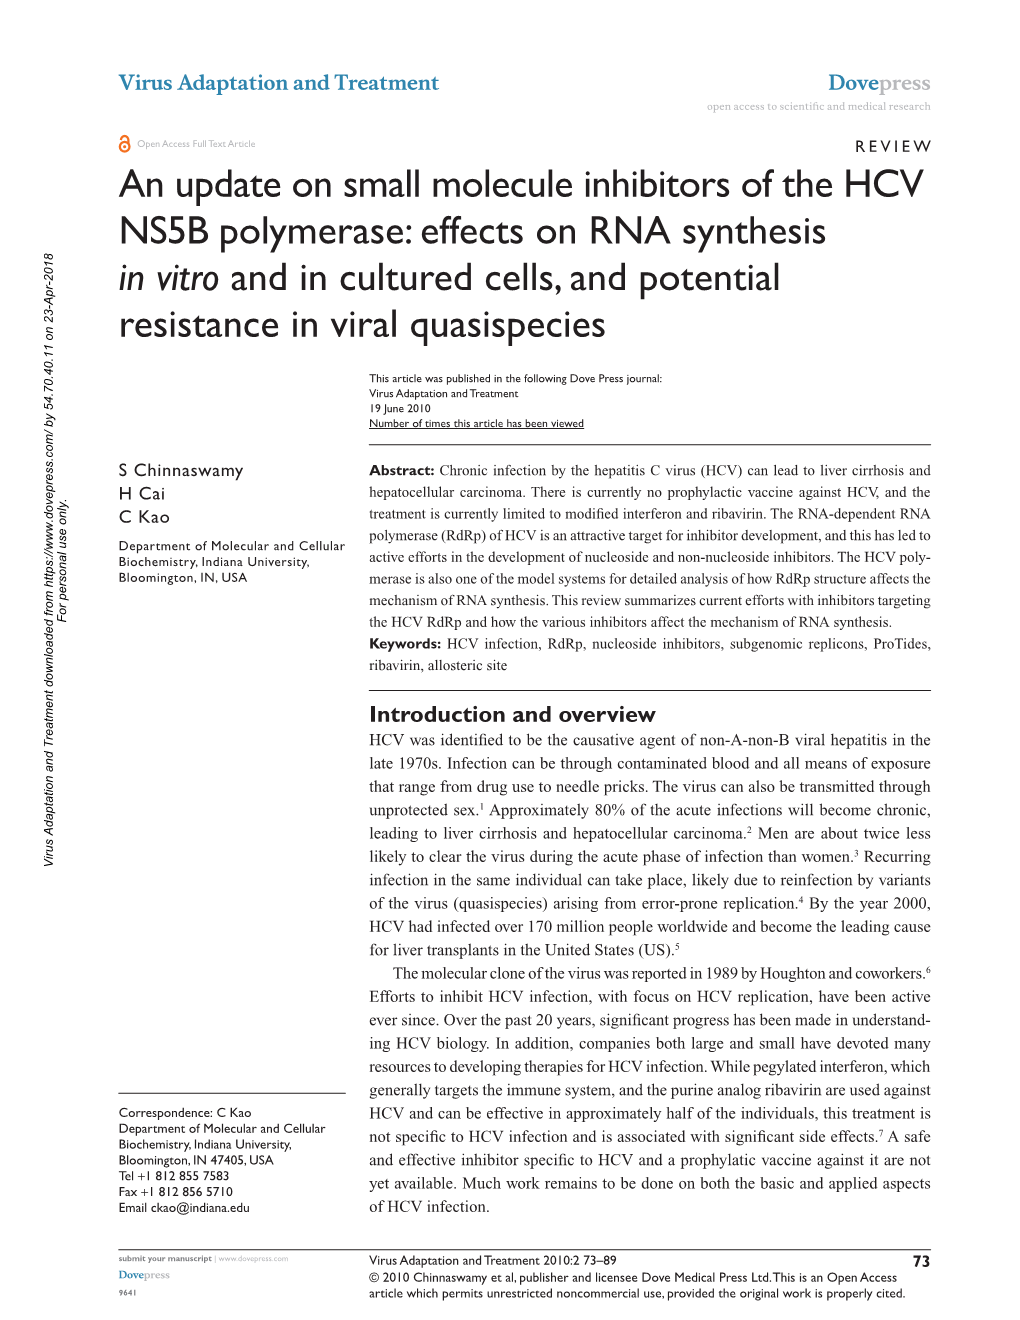 Effects on RNA Synthesis in Vitro and in Cultured Cells, and Potential Resistance in Viral Quasispecies